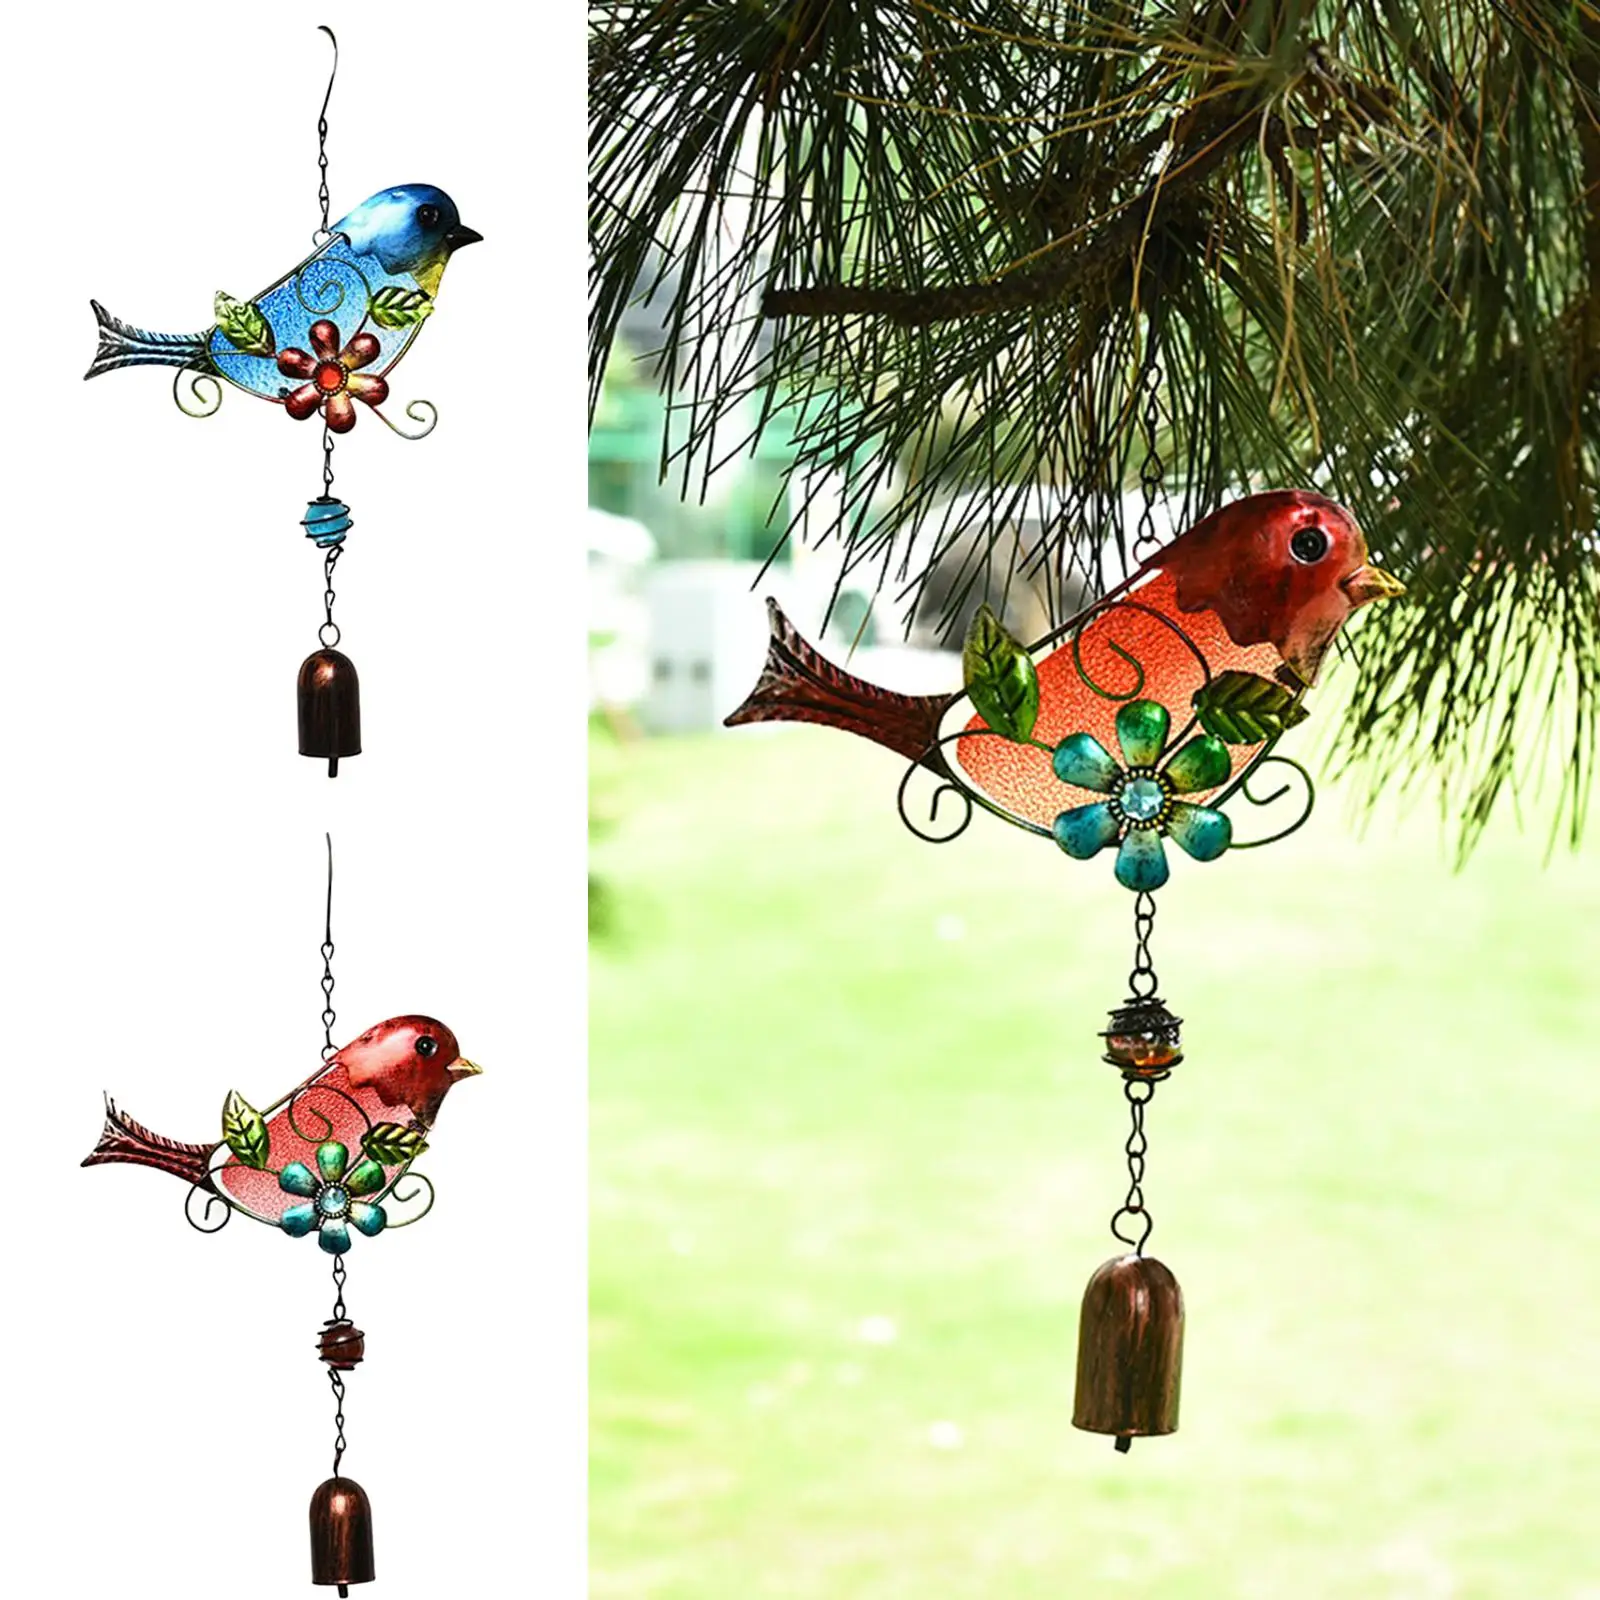 Outdoor  Wind Chimes, Indoor Decoration Home Decor, Hanging Wind Chime Windchime Gift for Mom Patio Yard Backyard